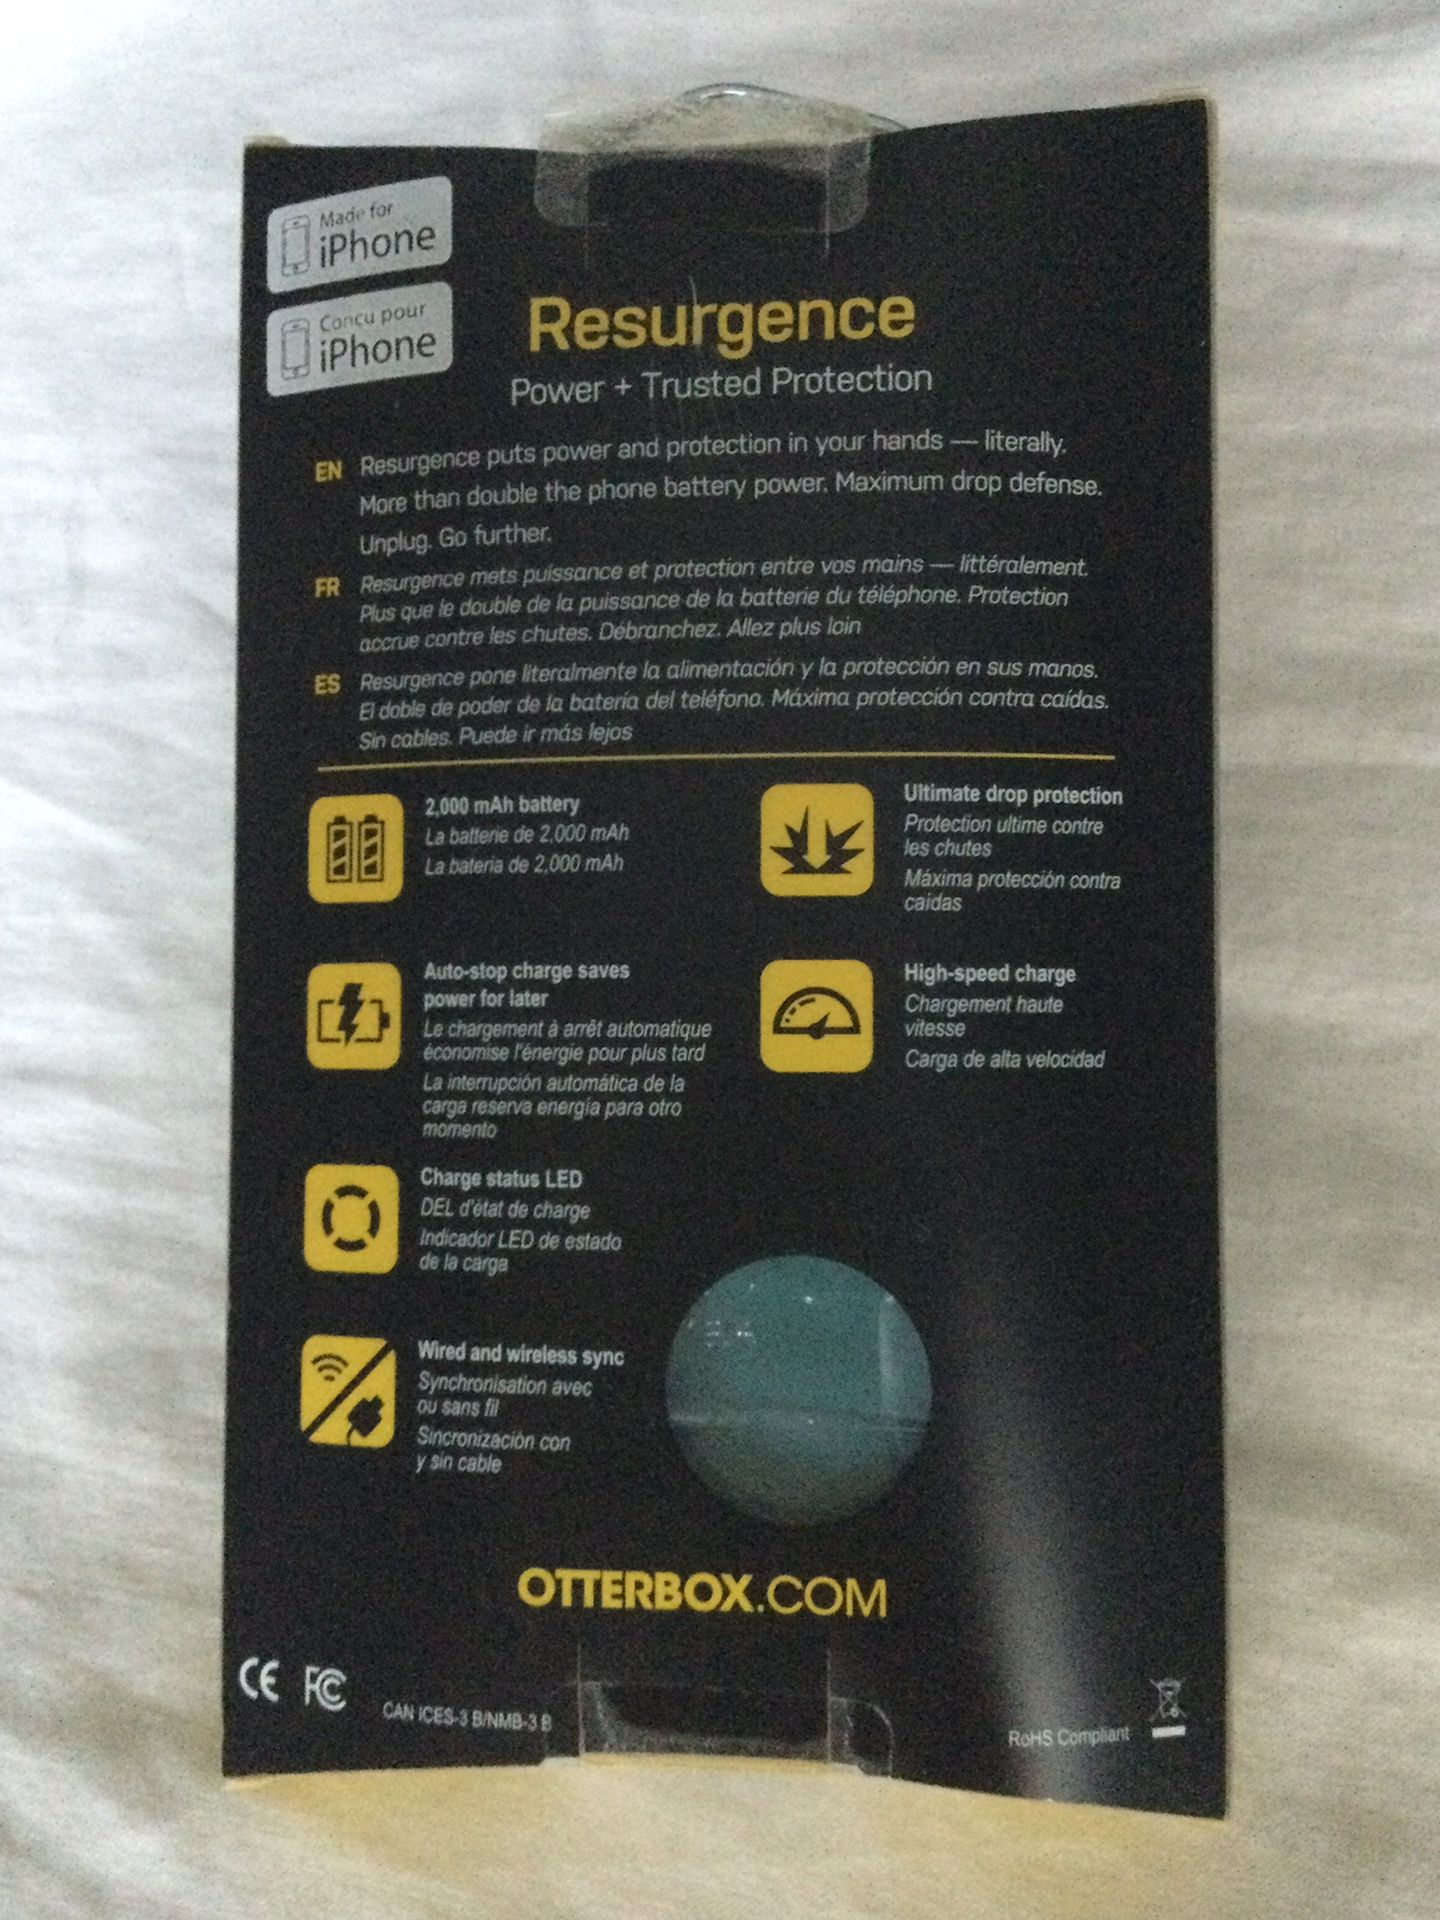 Otterbox New Resurgence case for iPhone 5s and iPhone 5